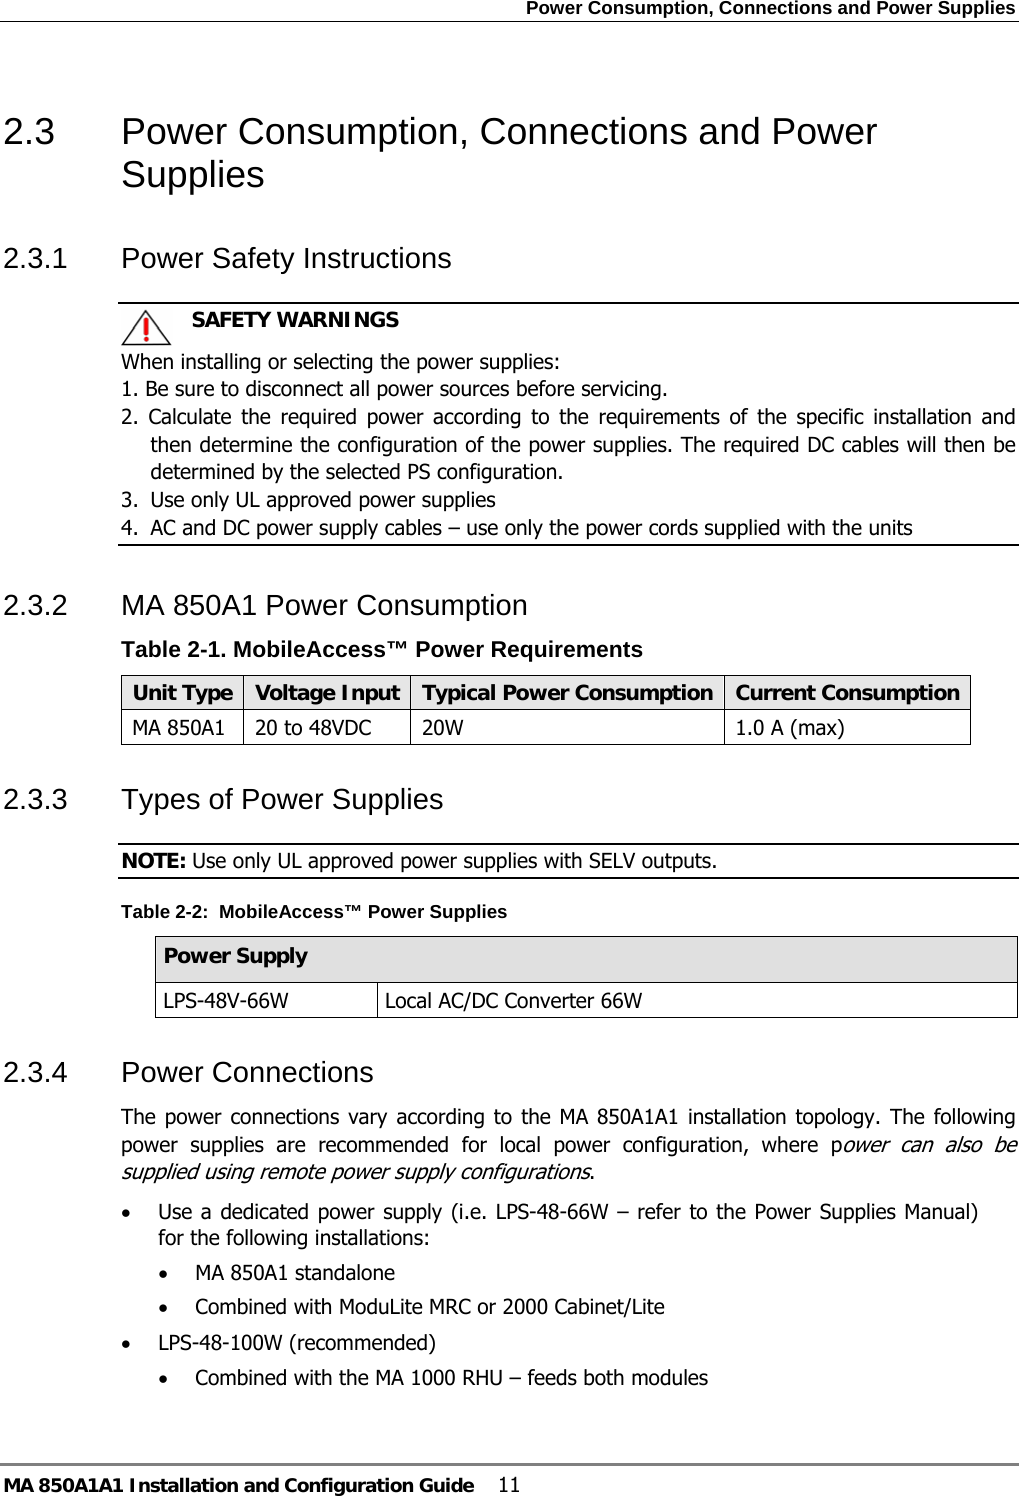 Power Consumption, Connections and Power Supplies MA 850A1A1 Installation and Configuration Guide  11 2.3  Power Consumption, Connections and Power Supplies 2.3.1  Power Safety Instructions    SAFETY WARNINGS When installing or selecting the power supplies:   1. Be sure to disconnect all power sources before servicing. 2. Calculate the required power according to the requirements of the specific installation and then determine the configuration of the power supplies. The required DC cables will then be determined by the selected PS configuration. 3.  Use only UL approved power supplies  4.  AC and DC power supply cables – use only the power cords supplied with the units  2.3.2  MA 850A1 Power Consumption  Table  2-1. MobileAccess™ Power Requirements Unit Type  Voltage Input Typical Power Consumption Current ConsumptionMA 850A1  20 to 48VDC  20W  1.0 A (max) 2.3.3  Types of Power Supplies NOTE: Use only UL approved power supplies with SELV outputs. Table  2-2:  MobileAccess™ Power Supplies Power Supply LPS-48V-66W  Local AC/DC Converter 66W  2.3.4  Power Connections  The power connections vary according to the MA 850A1A1 installation topology. The following power supplies are recommended for local power configuration, where power can also be supplied using remote power supply configurations. • Use a dedicated power supply (i.e. LPS-48-66W – refer to the Power Supplies Manual) for the following installations: • MA 850A1 standalone • Combined with ModuLite MRC or 2000 Cabinet/Lite • LPS-48-100W (recommended)  • Combined with the MA 1000 RHU – feeds both modules  